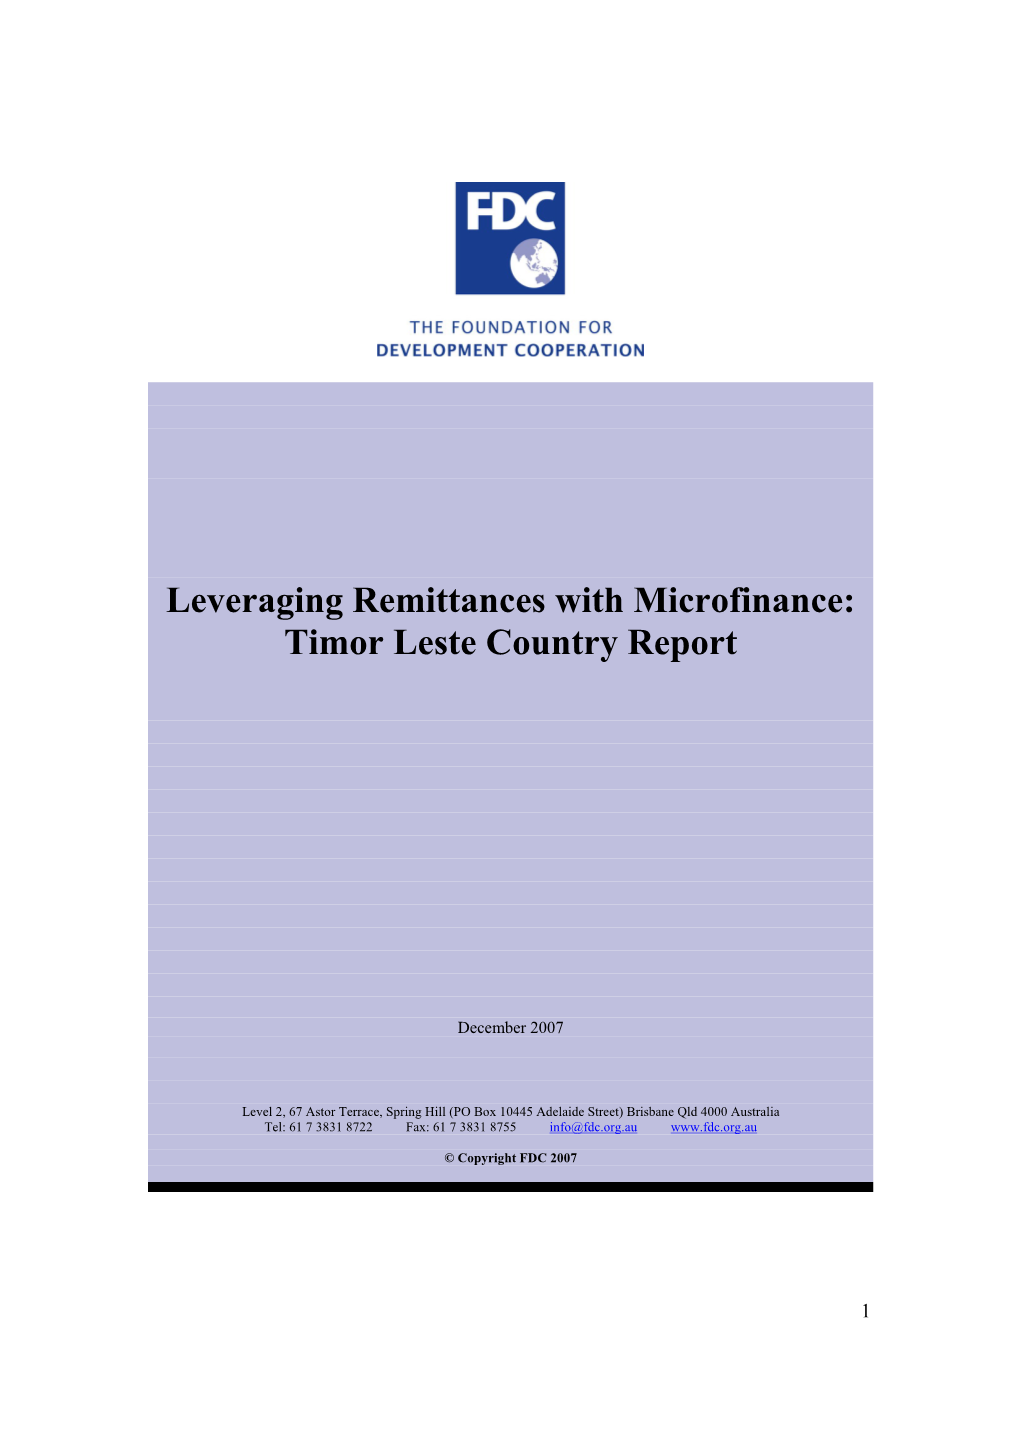 Leveraging Remittances with Microfinance: Timor Leste Country Report